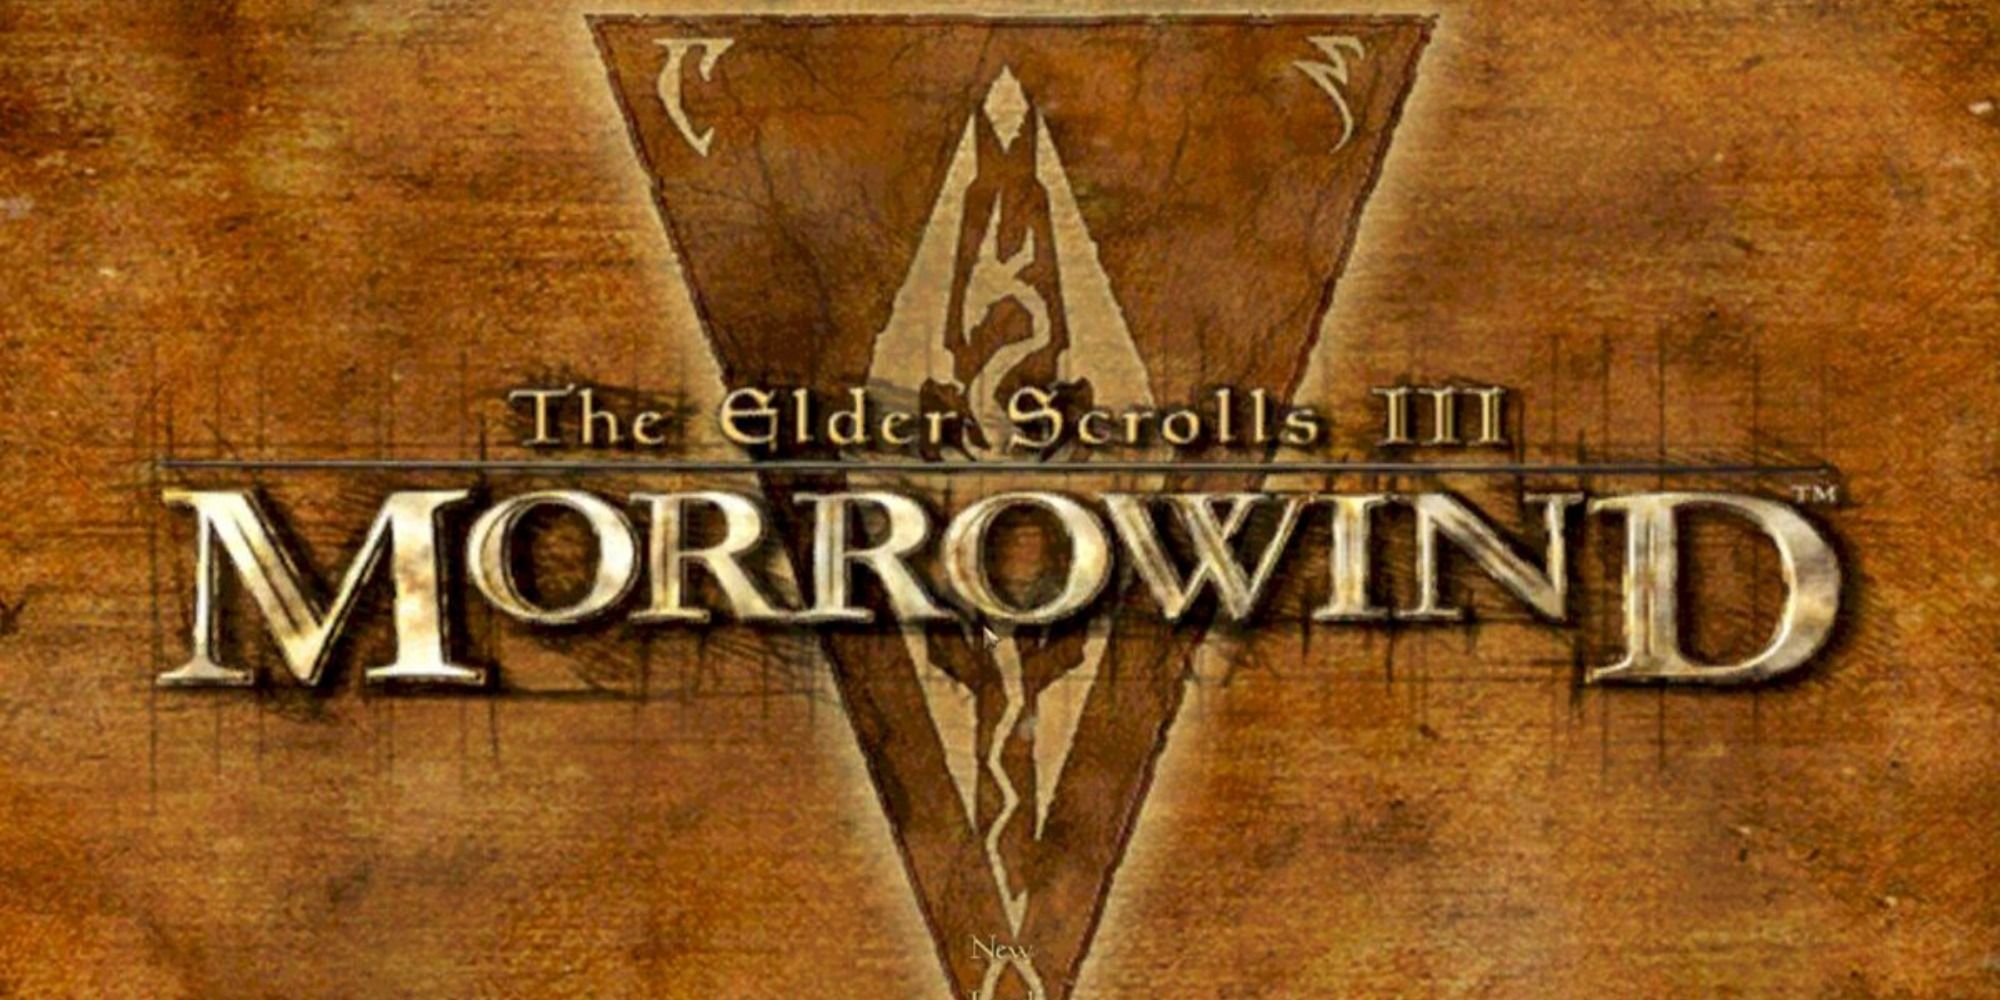 Title art for Morrowind on a sepia background with a dragon sigil behind